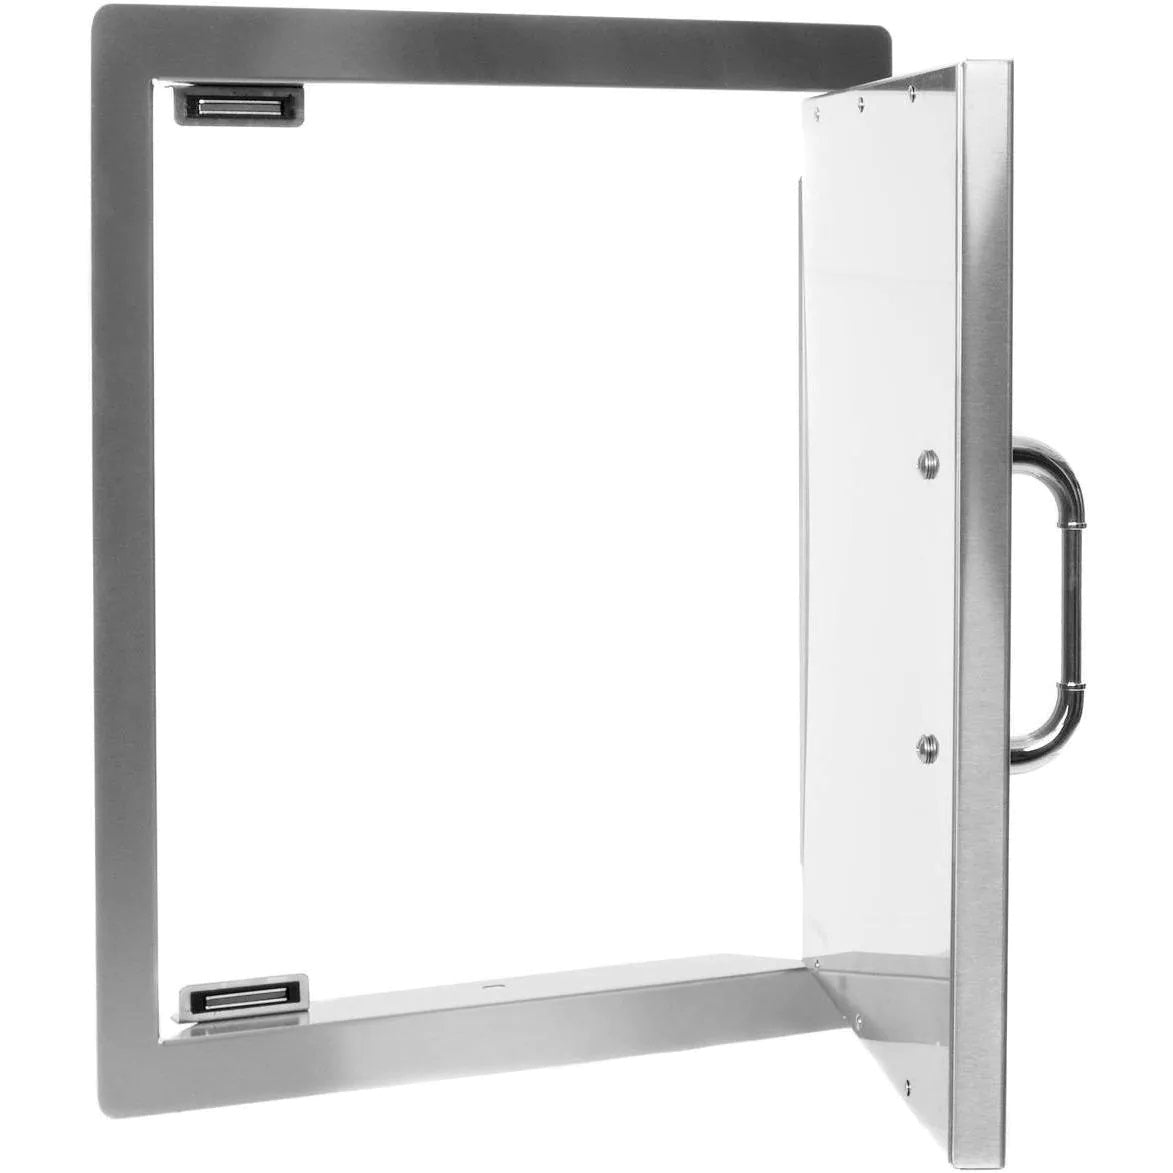 Bull 18-Inch Right Hinged Stainless Steel Single Access Door